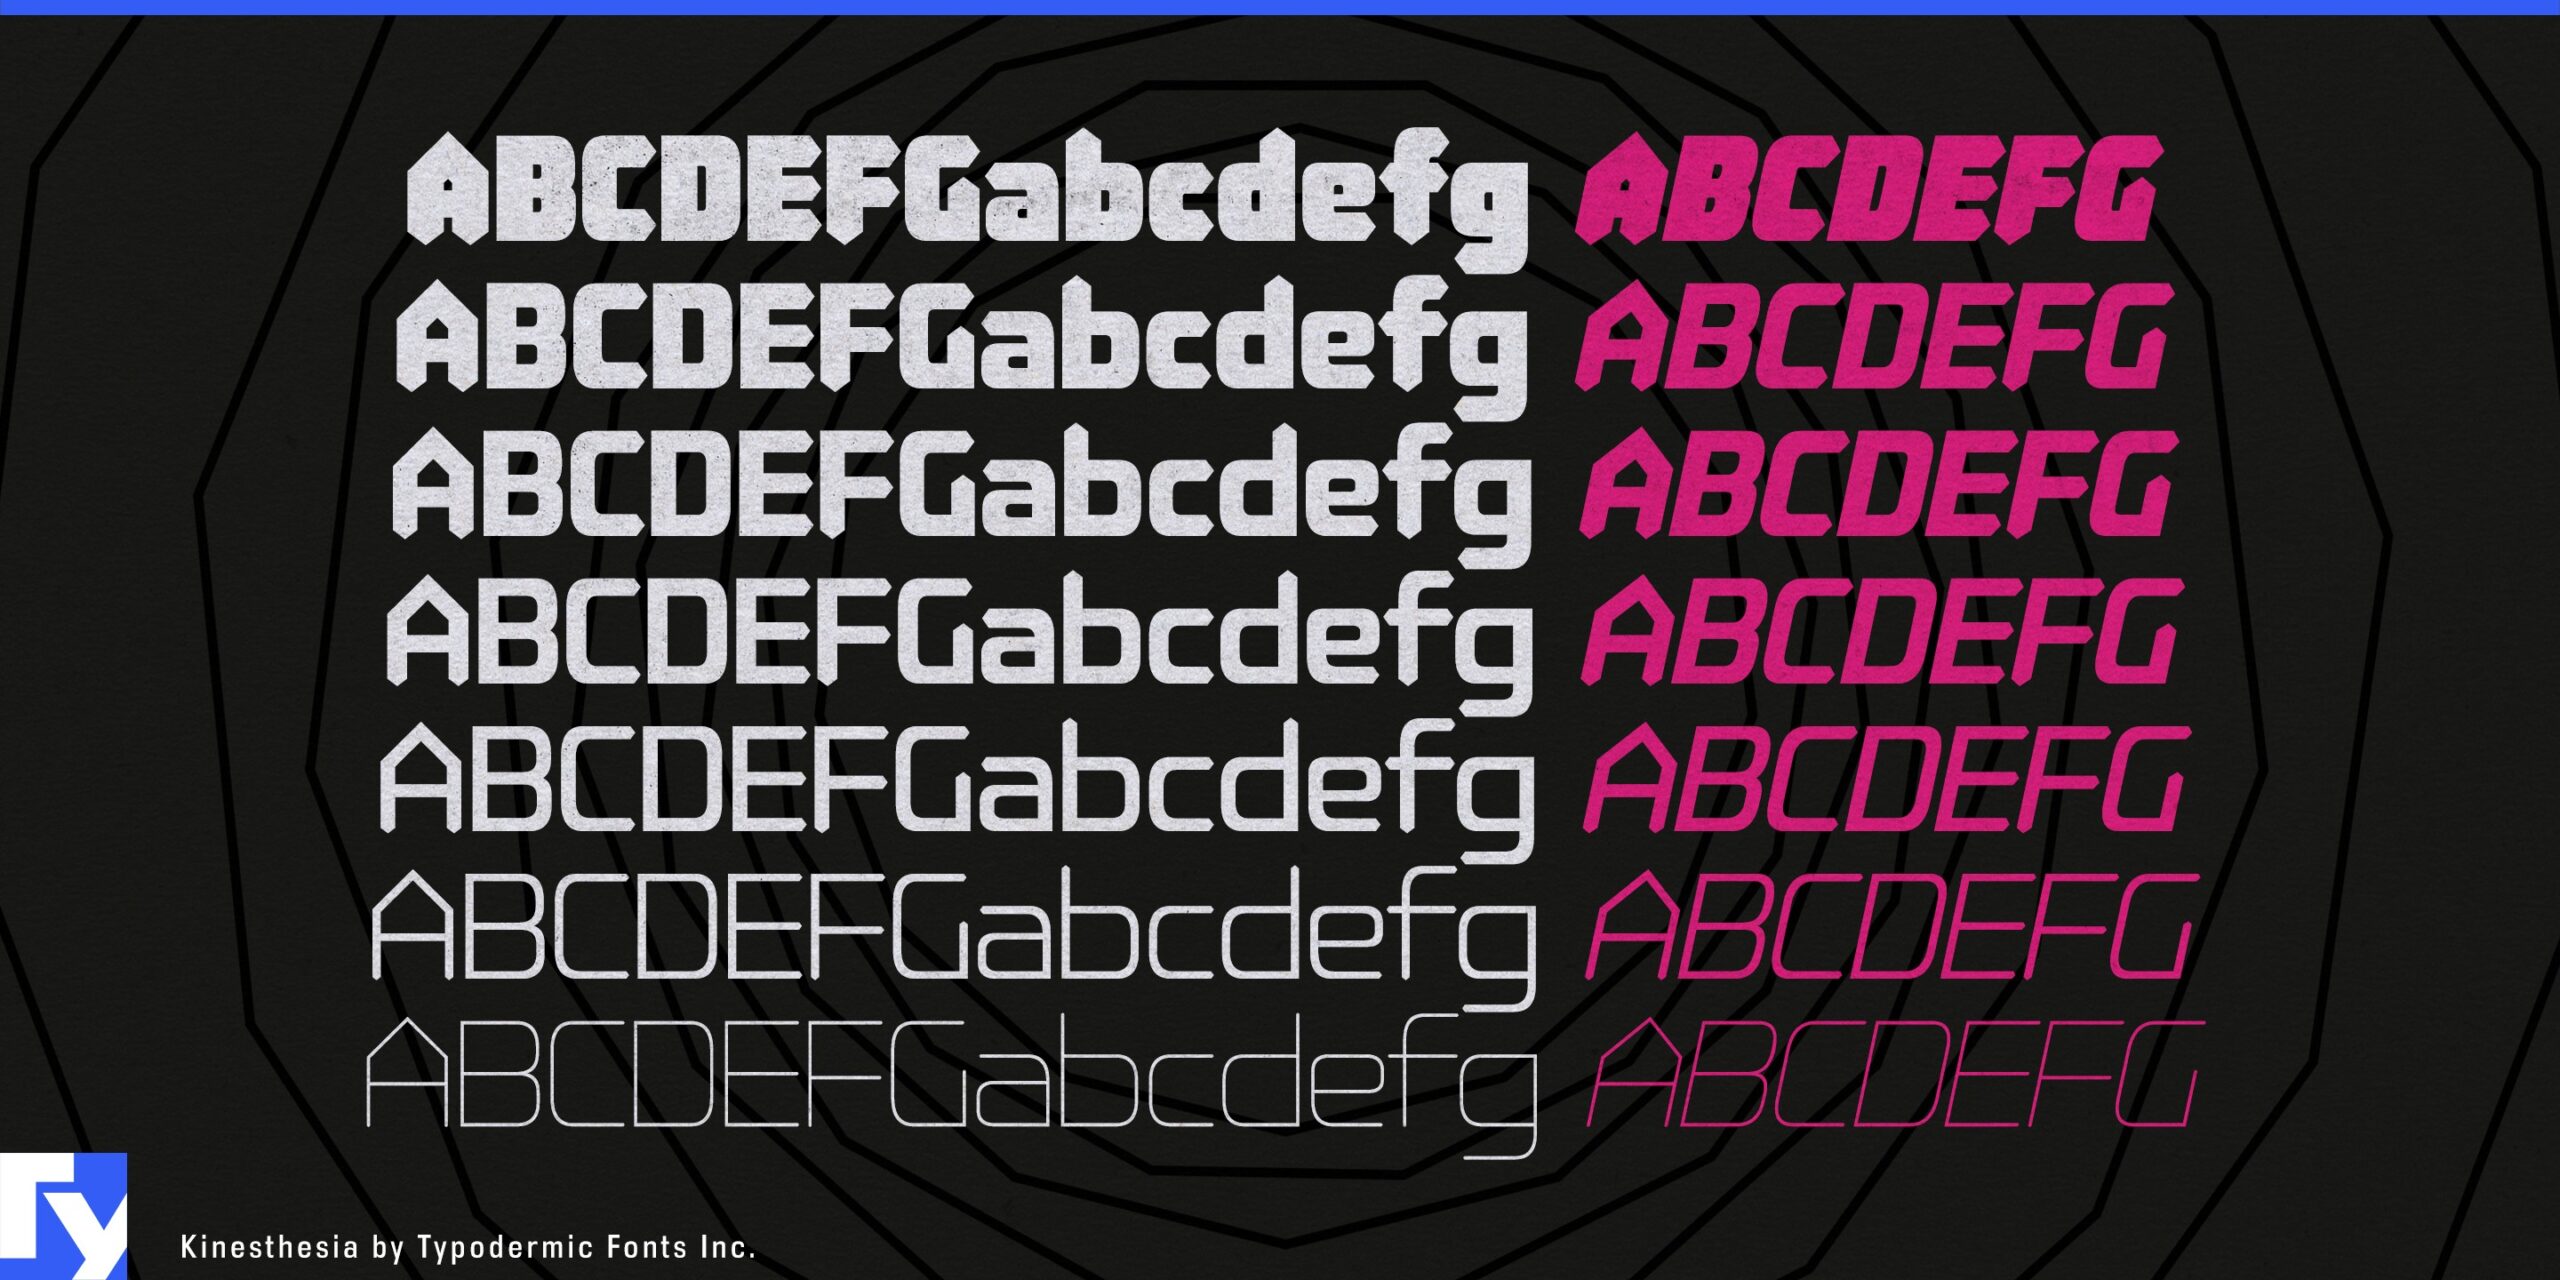 Cool and Technical: Kinesthesia Typeface for a Hi-Tech Look